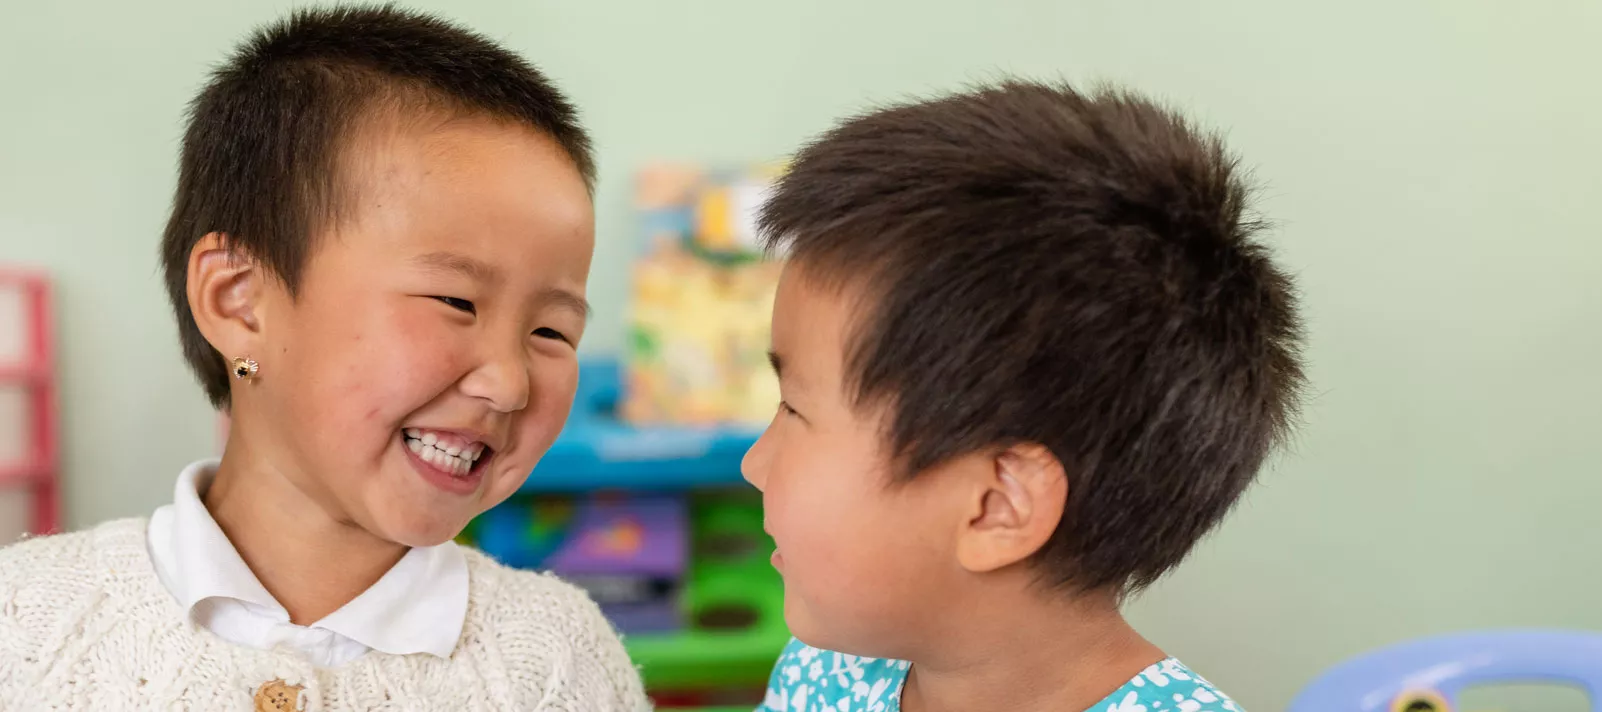 Two small girls smile to each other at an early childhood development center, supported by UNICEF, in Ulaanbaatar, Mongolia, in September 2018.